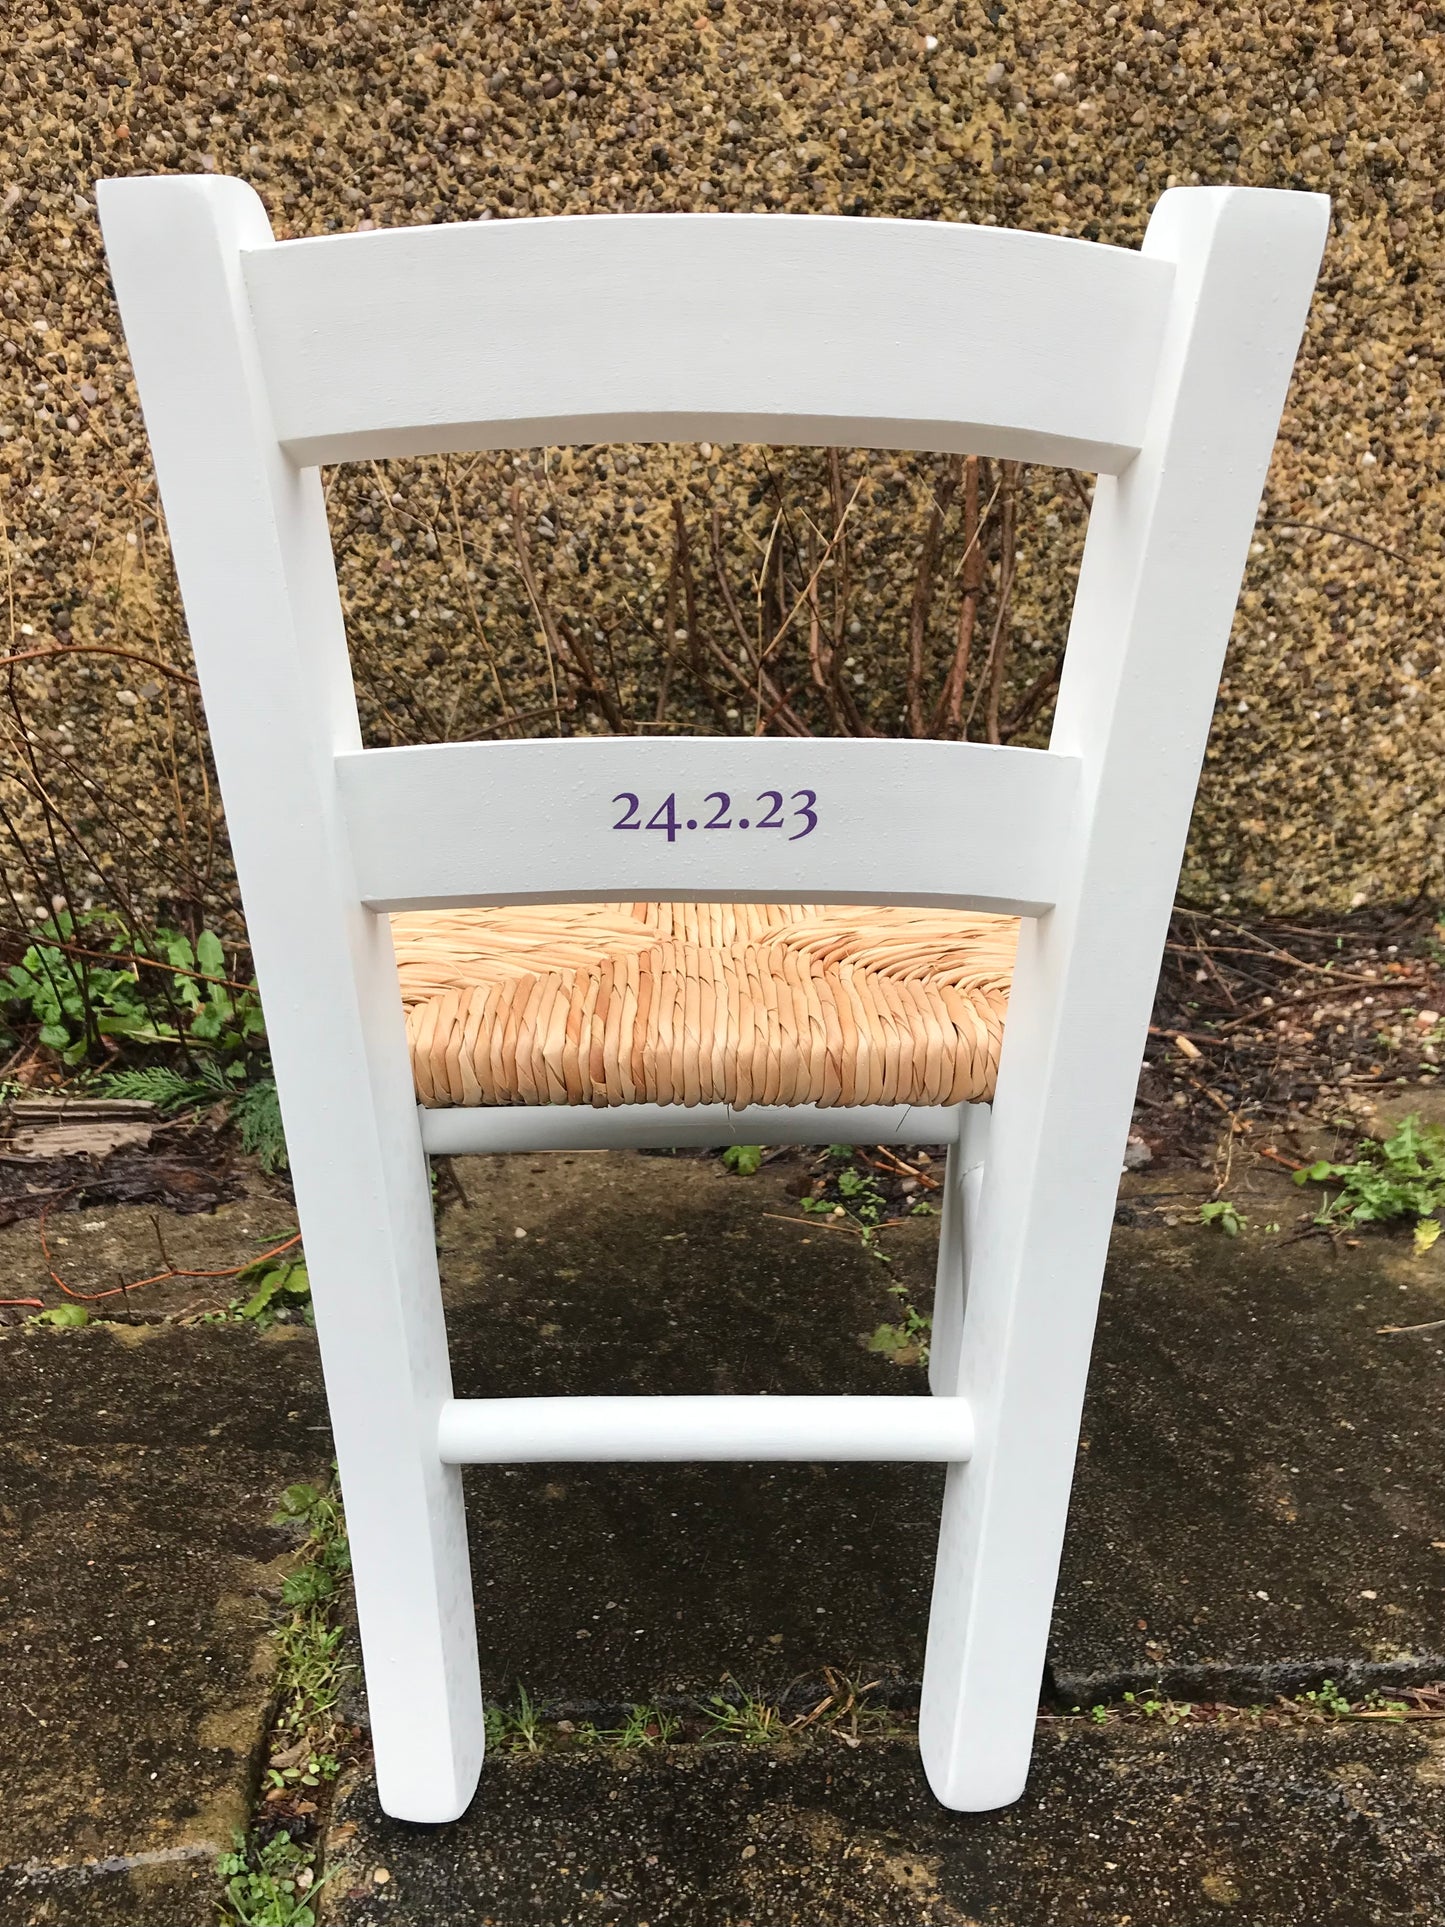 Rush seat personalised children's chair - Flower Garland theme - made to order